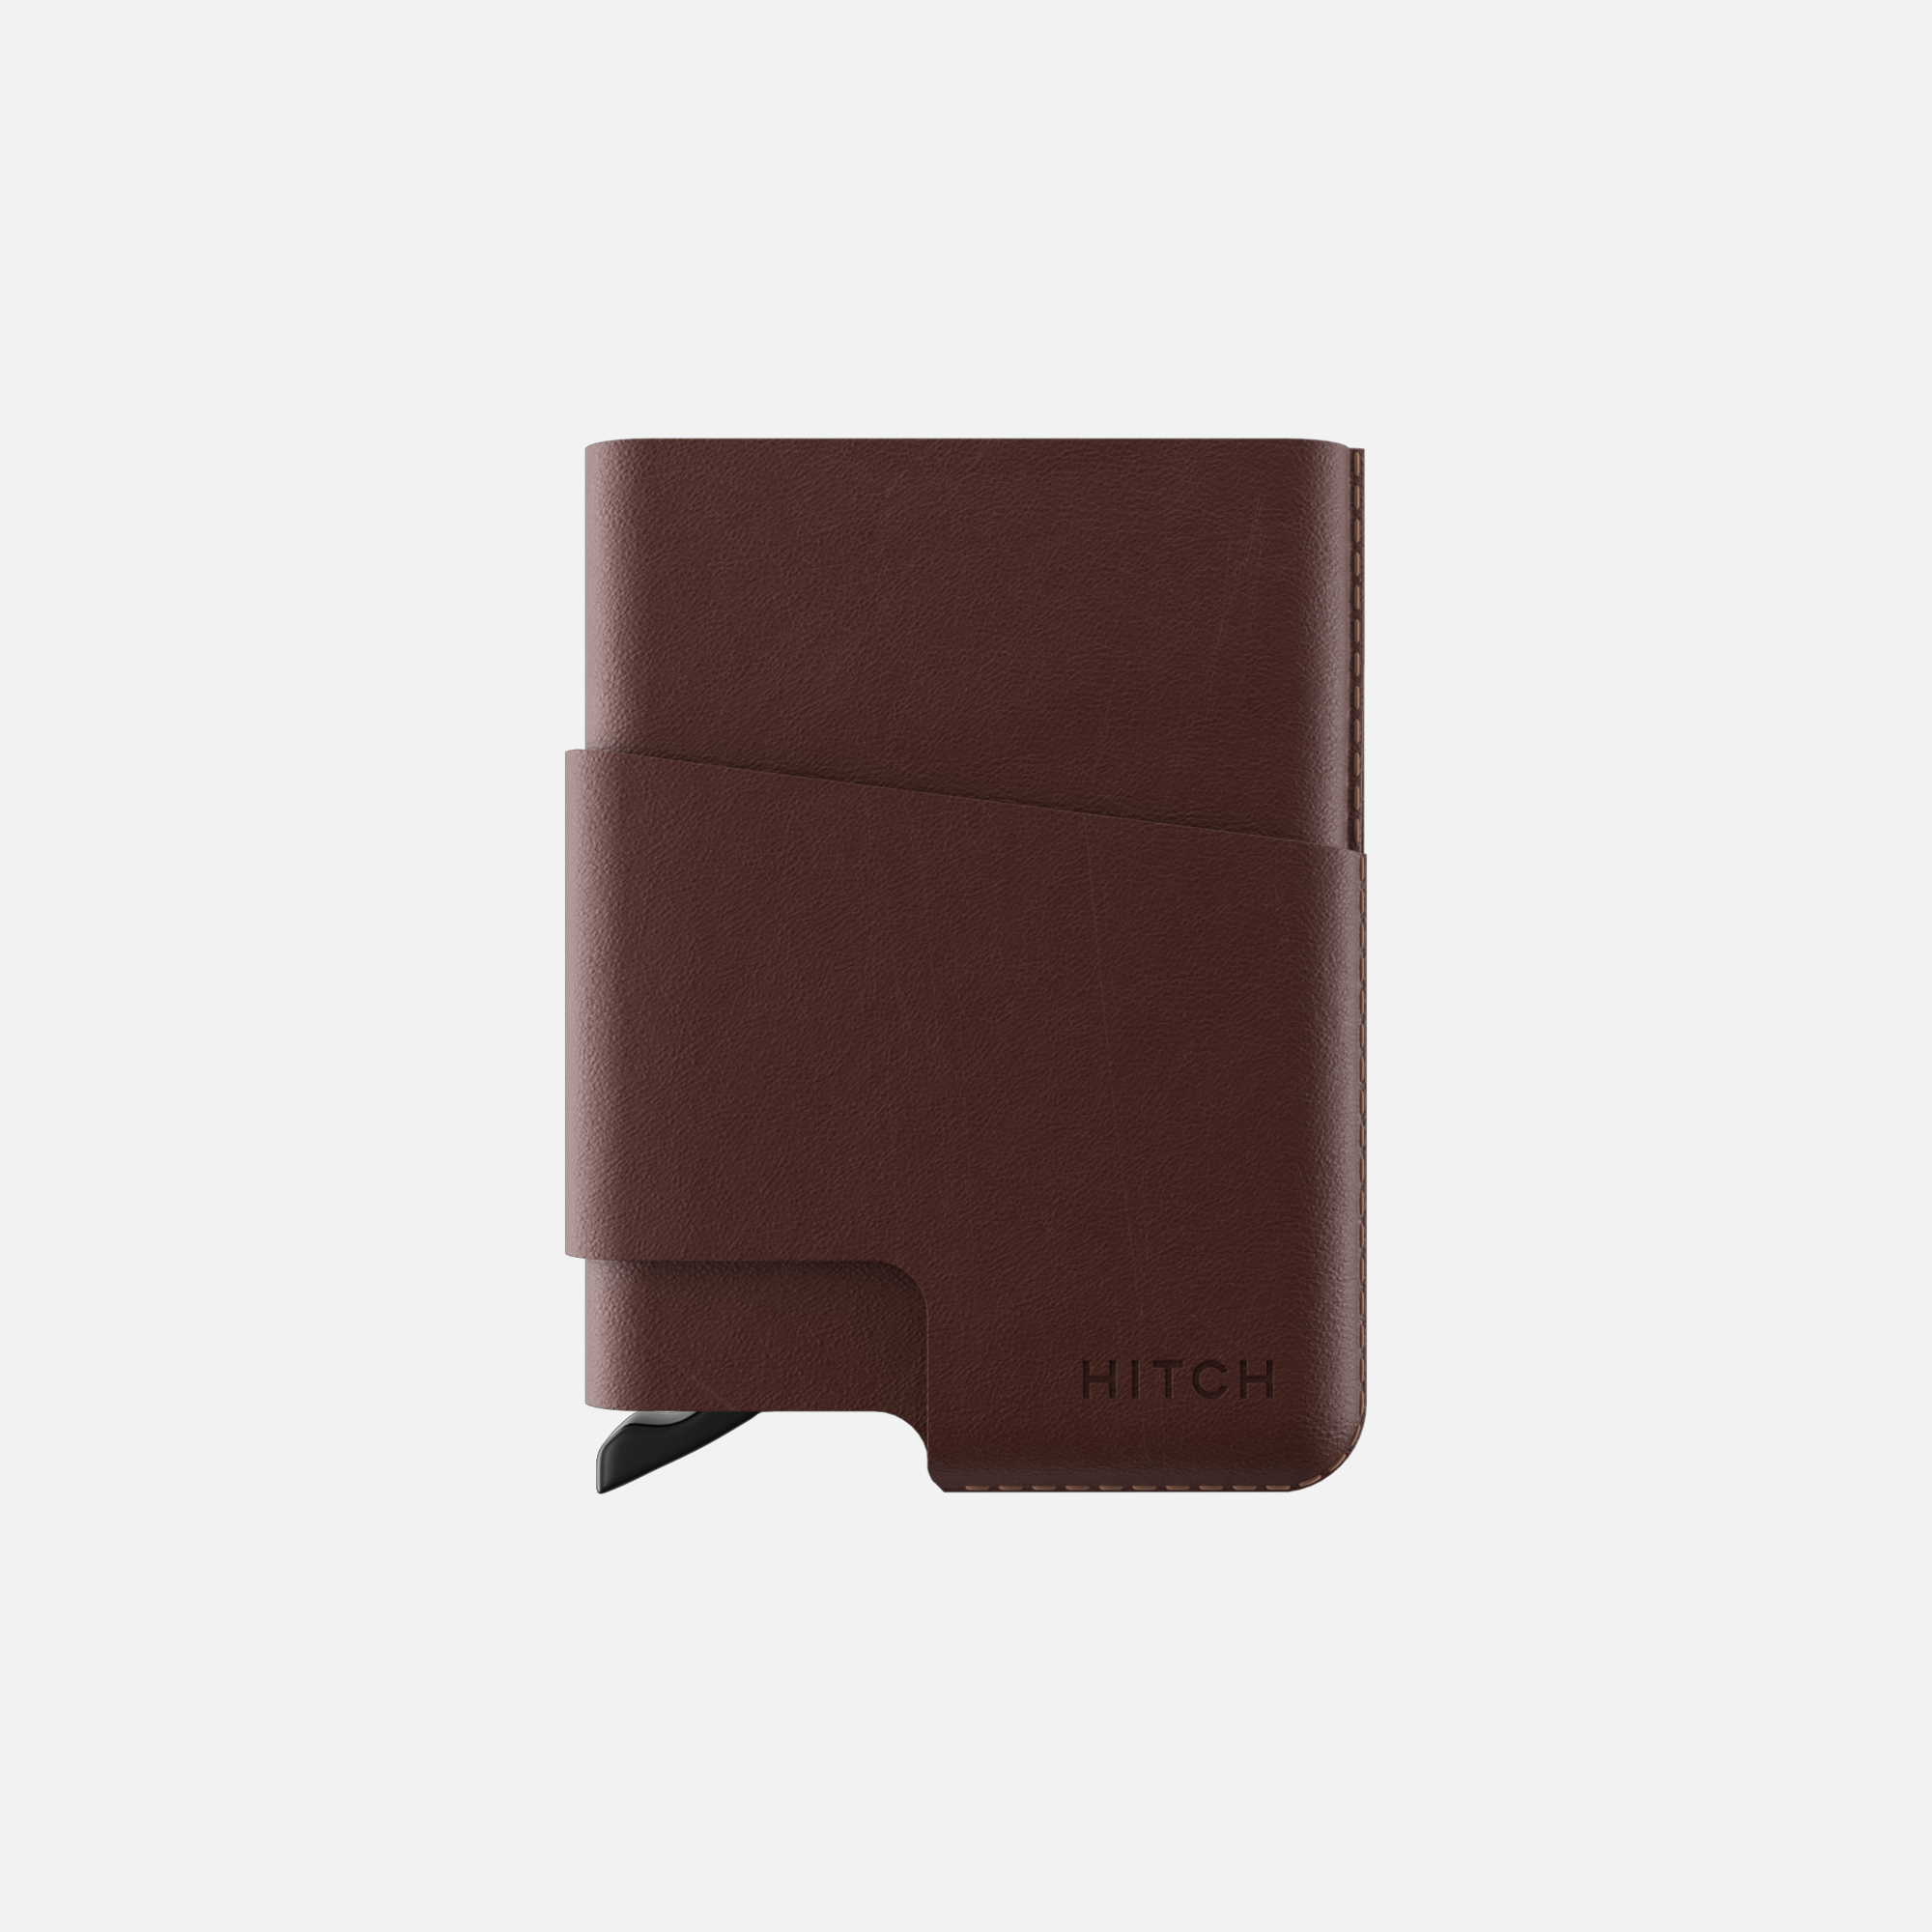 Brown leather minimalist wallet front view isolated on white.